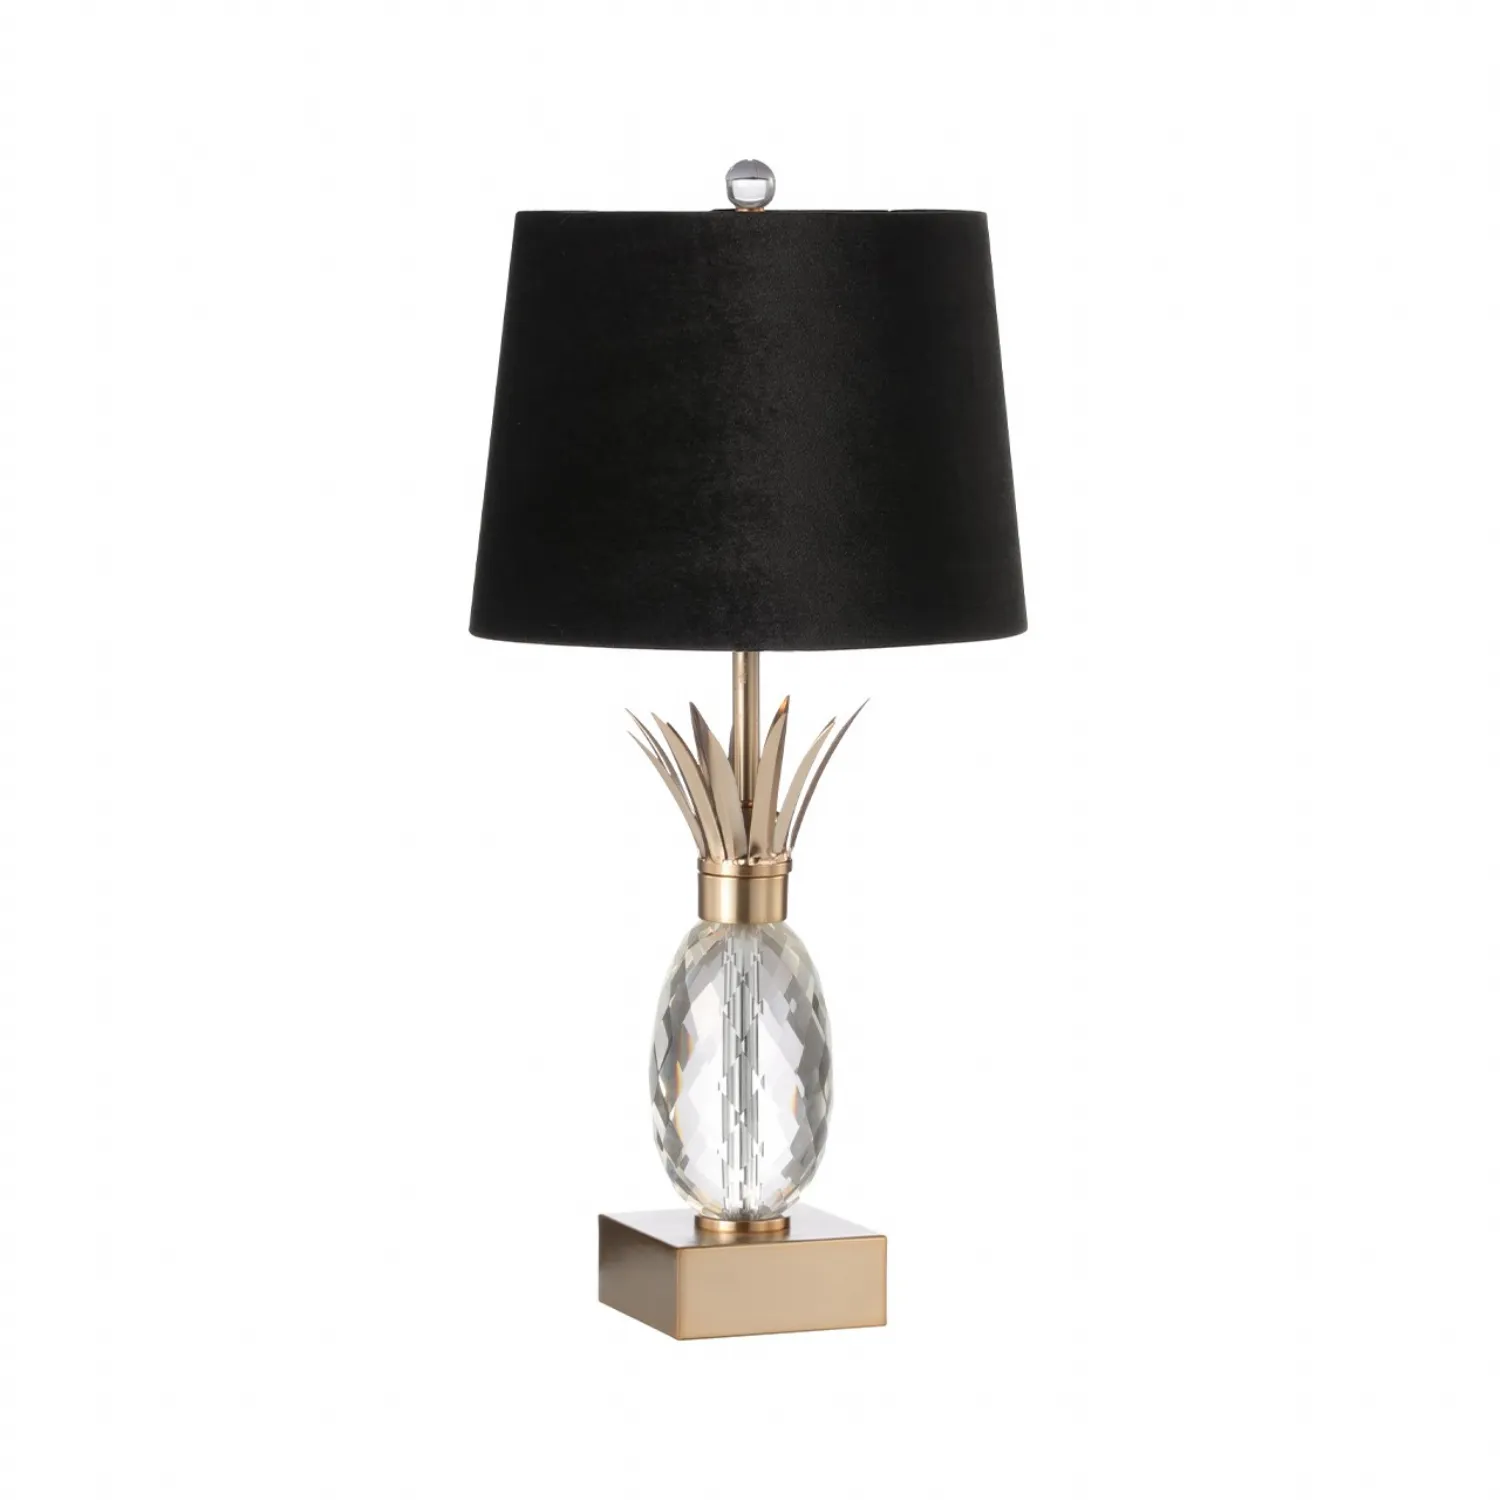 64. 1cm Champagne Metal Table Lamp With Pineapple Glass And Black Velvet Shade